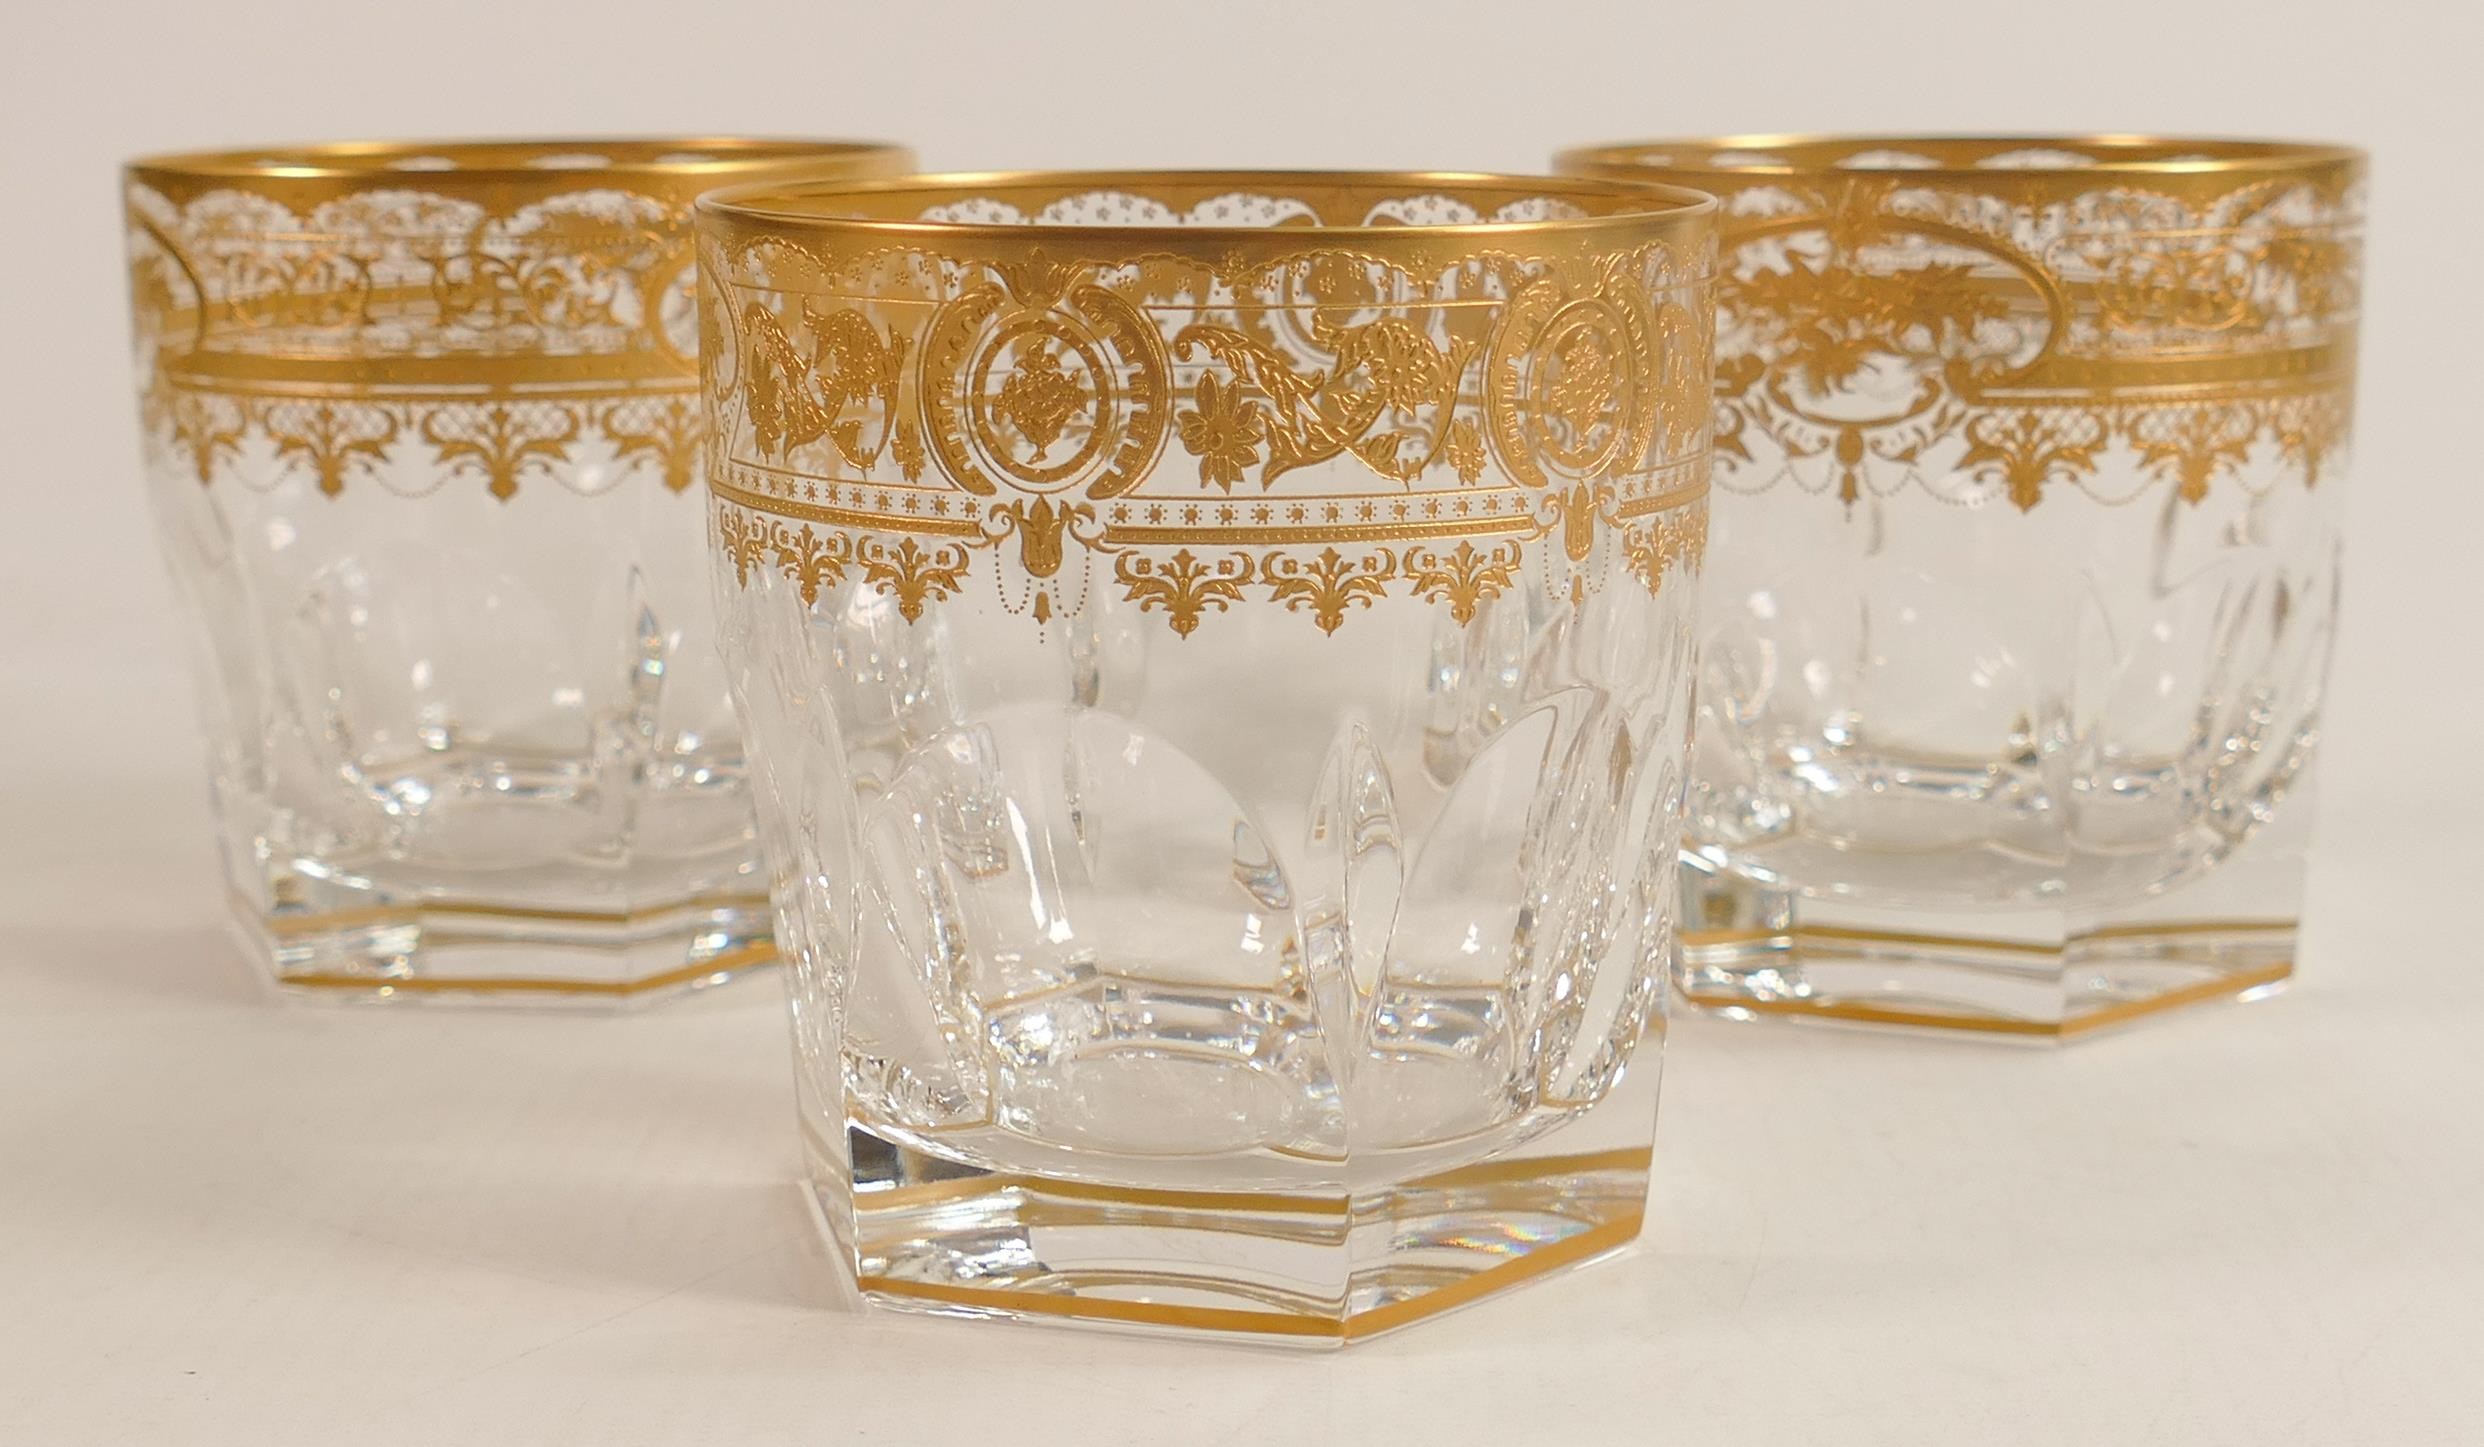 De Lamerie fine crystal heavily gilded Whisky glasses, specially made high end quality items, height